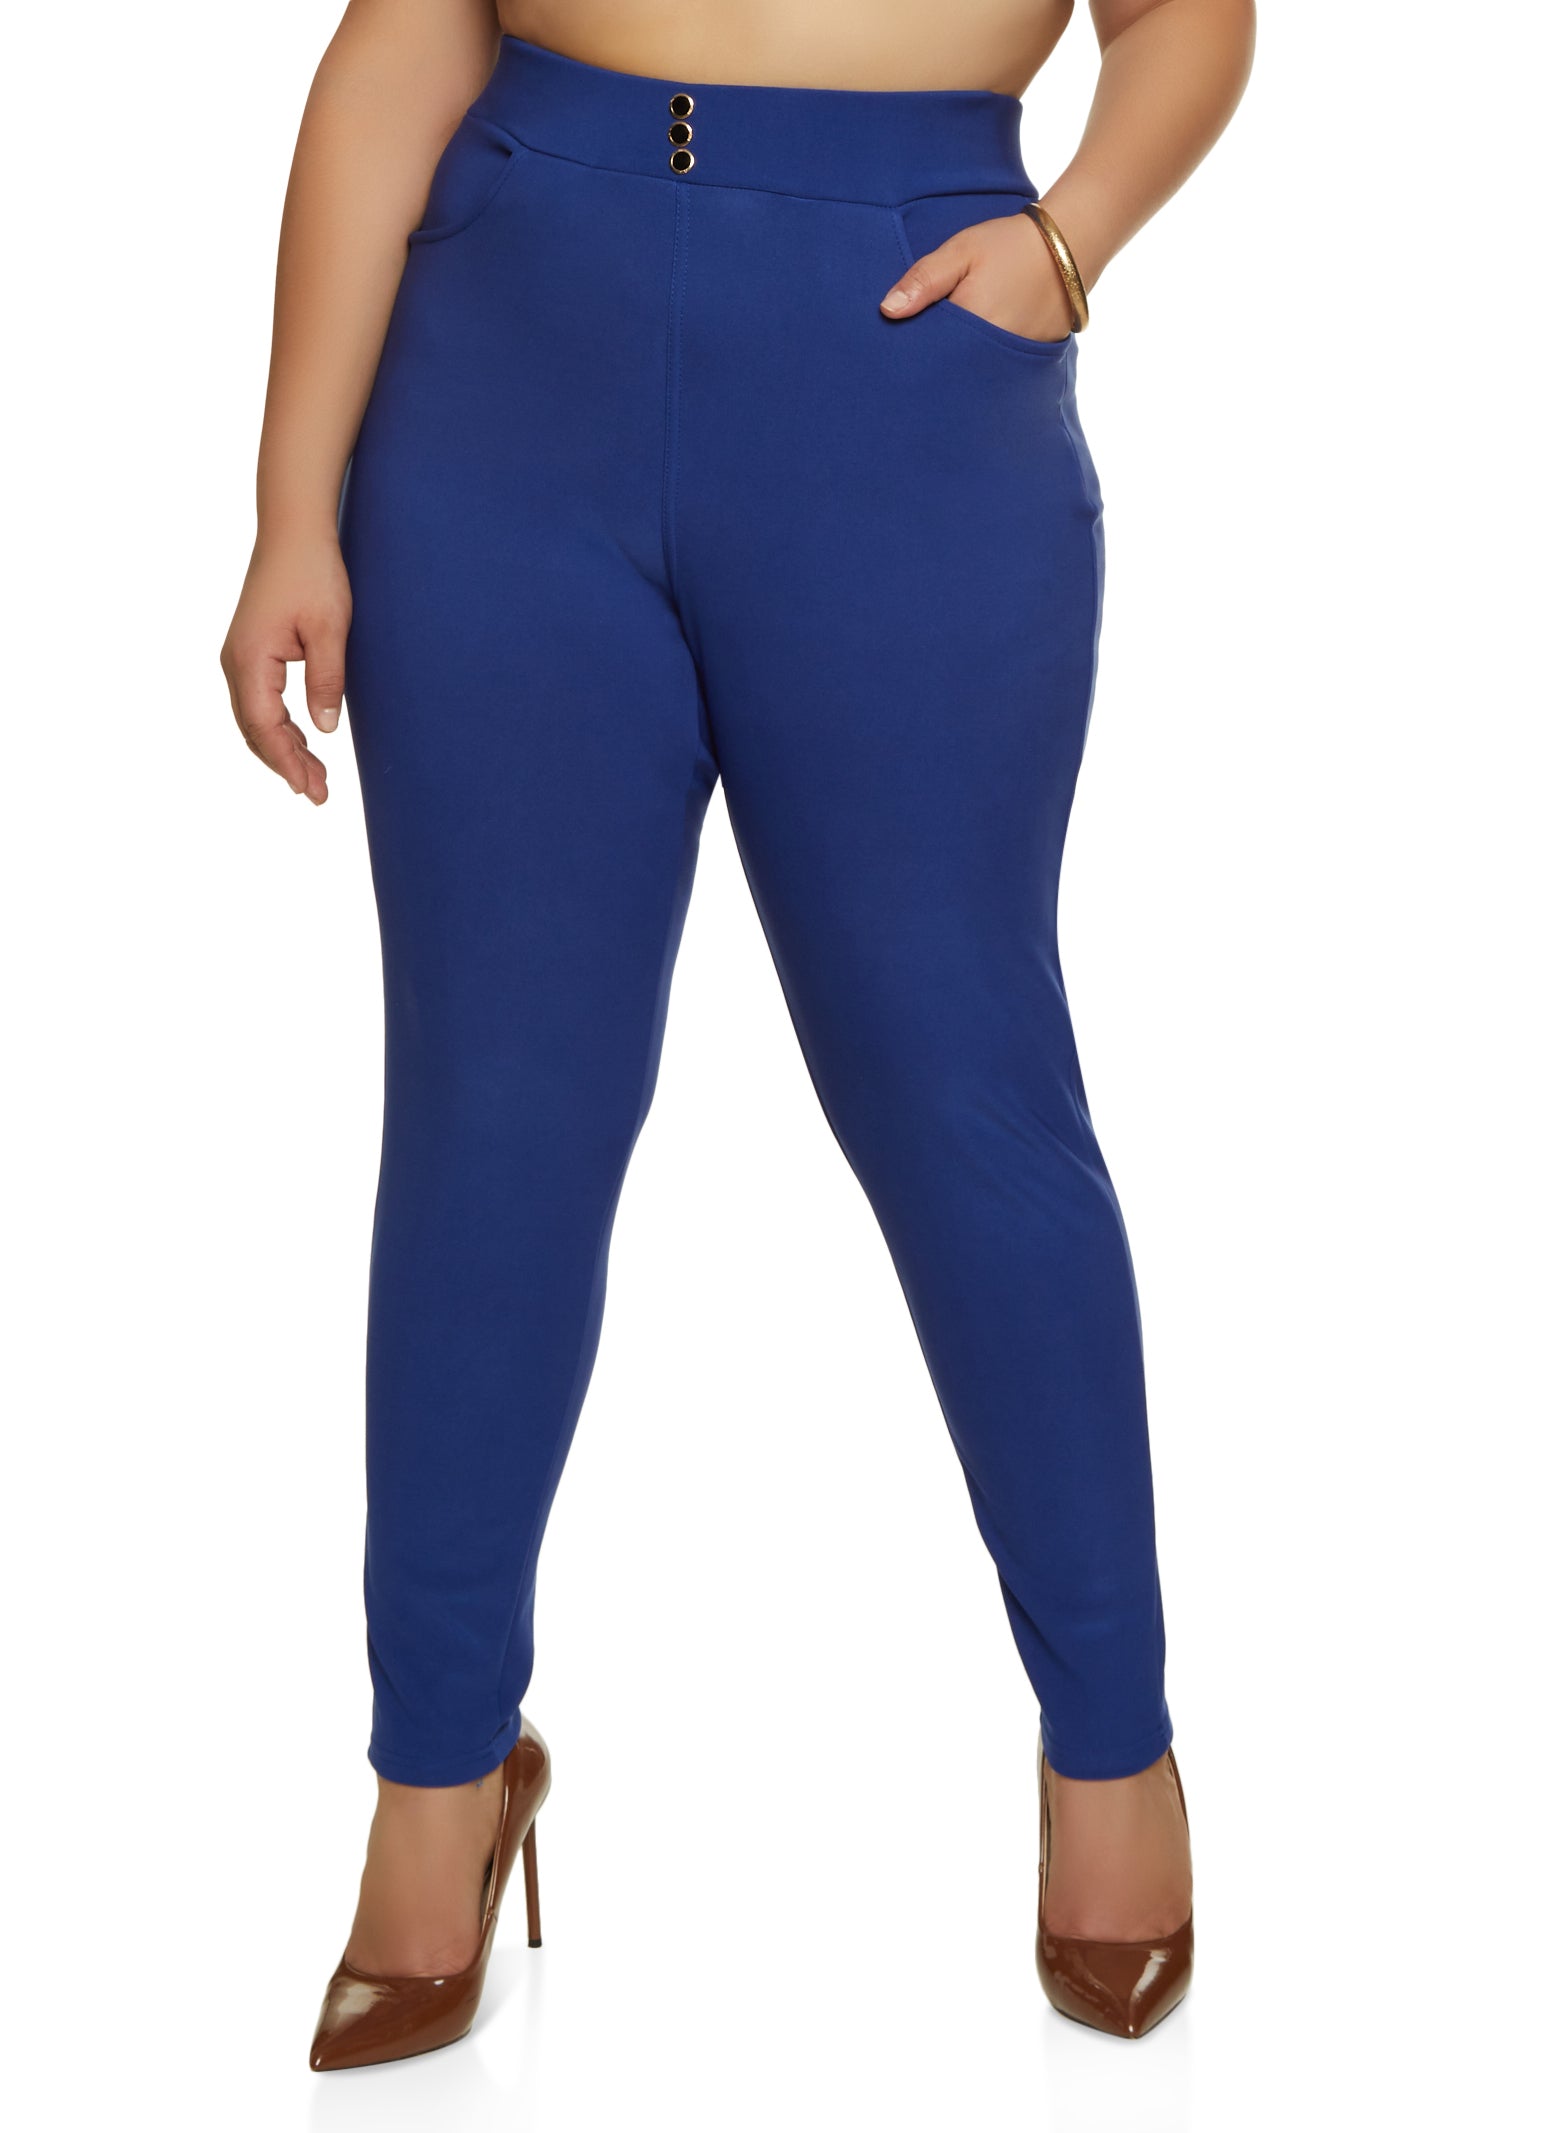 Plus Size Dress Pants, Everyday Low Prices